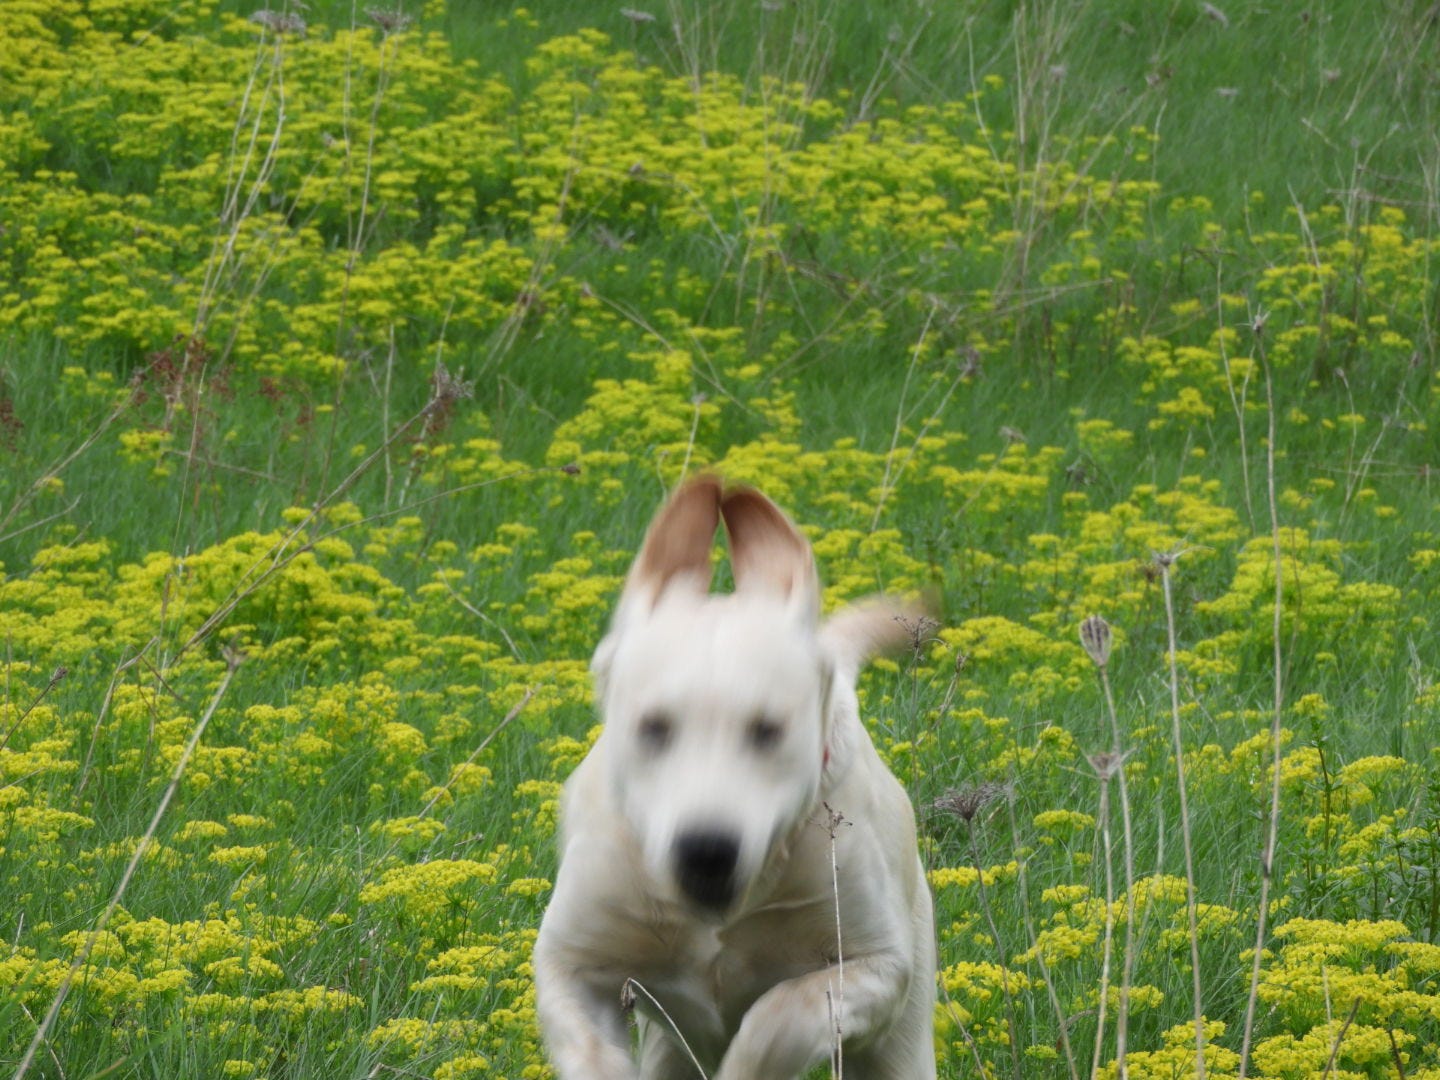 Yellow Labrador Retriever puppy running through a green field filled with goldenrod